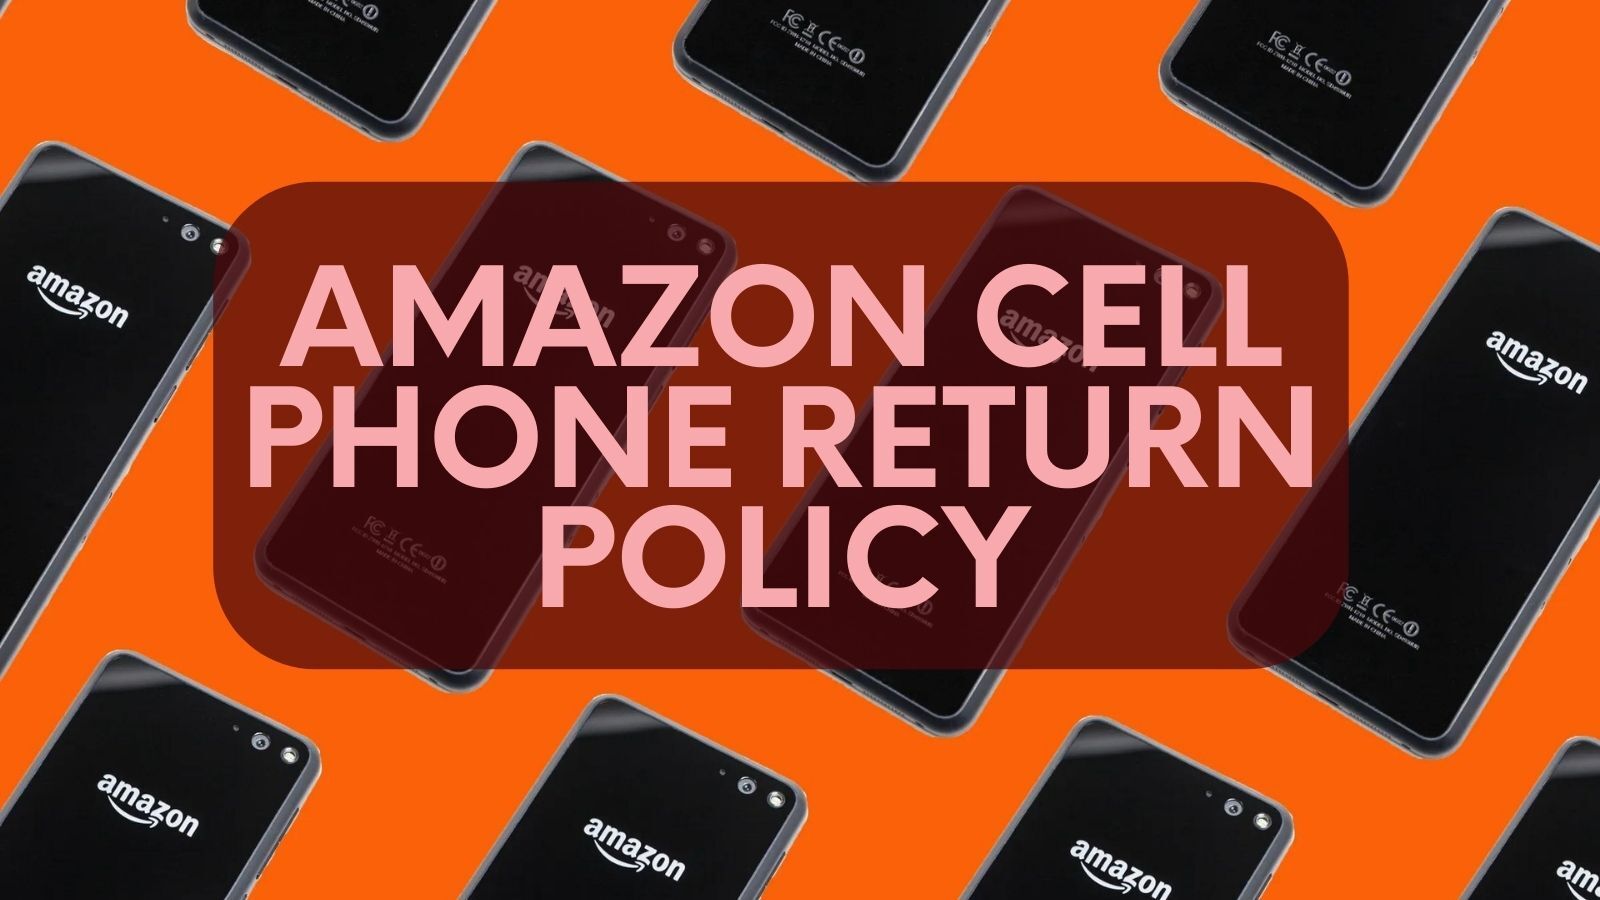 Amazon Cell Phone Return Policy: How It Works?